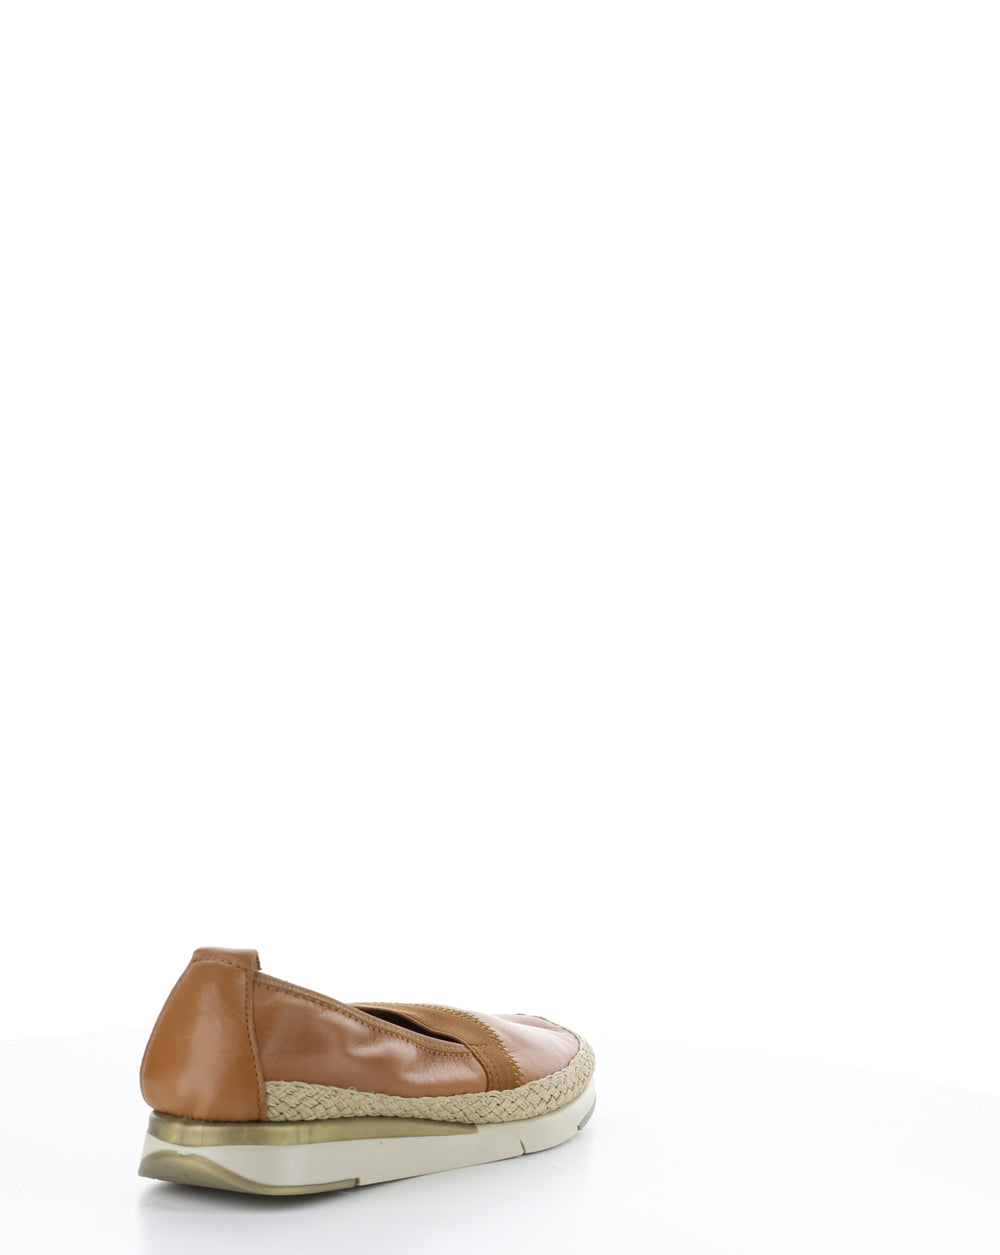 FASTEST TAN Round Toe Shoes